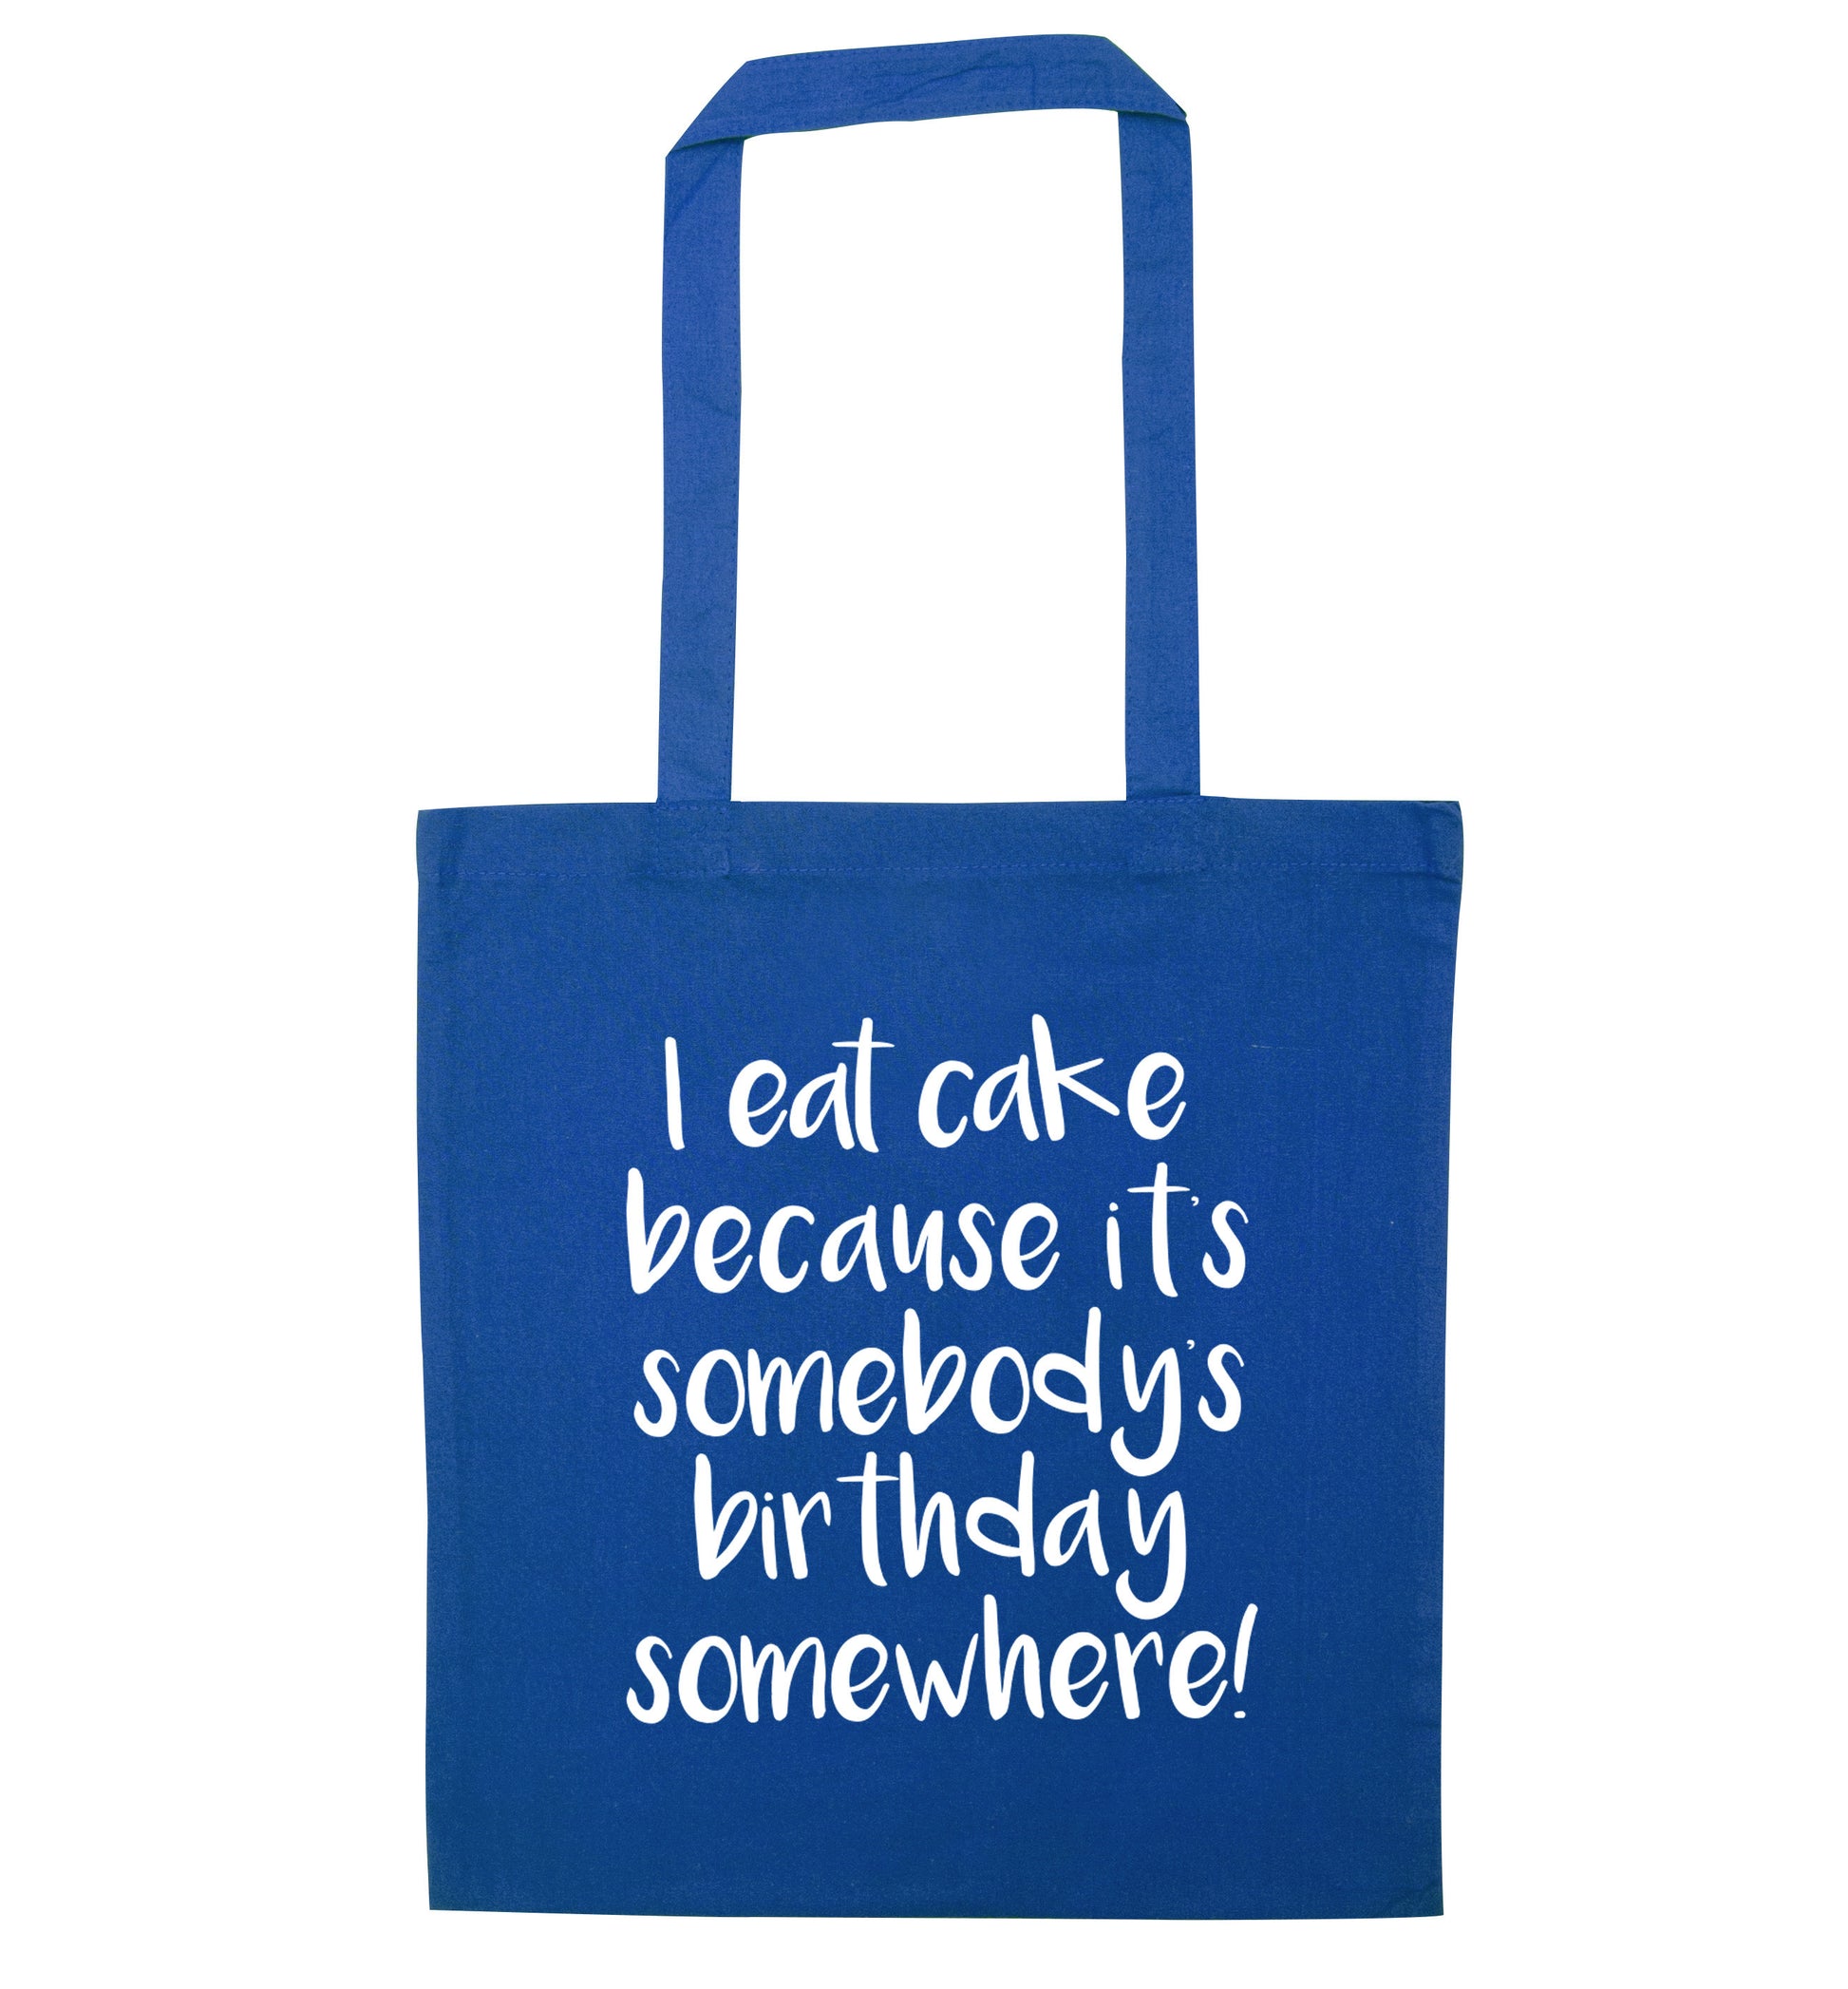 I eat cake because it's somebody's birthday somewhere! blue tote bag